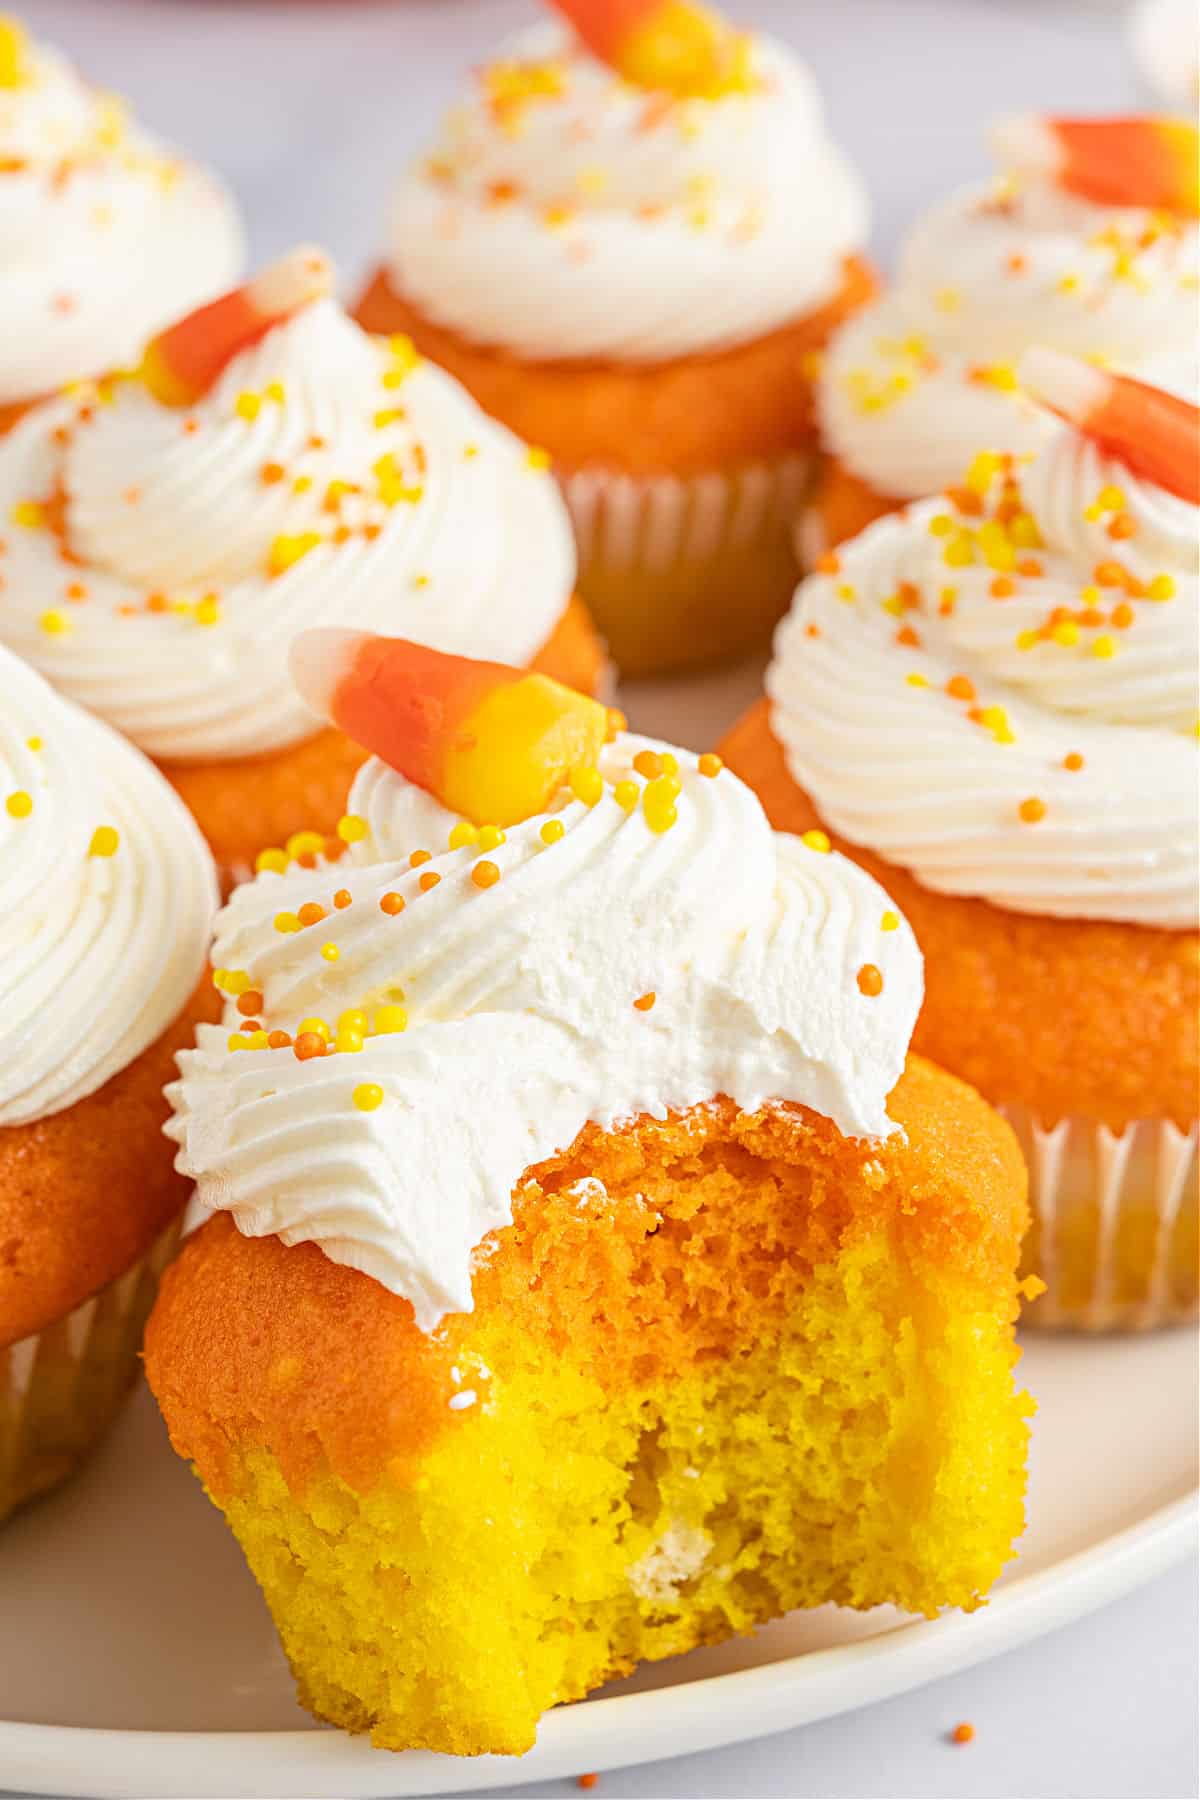 Candy corn colored cupcakes with frosting and bite taken out.